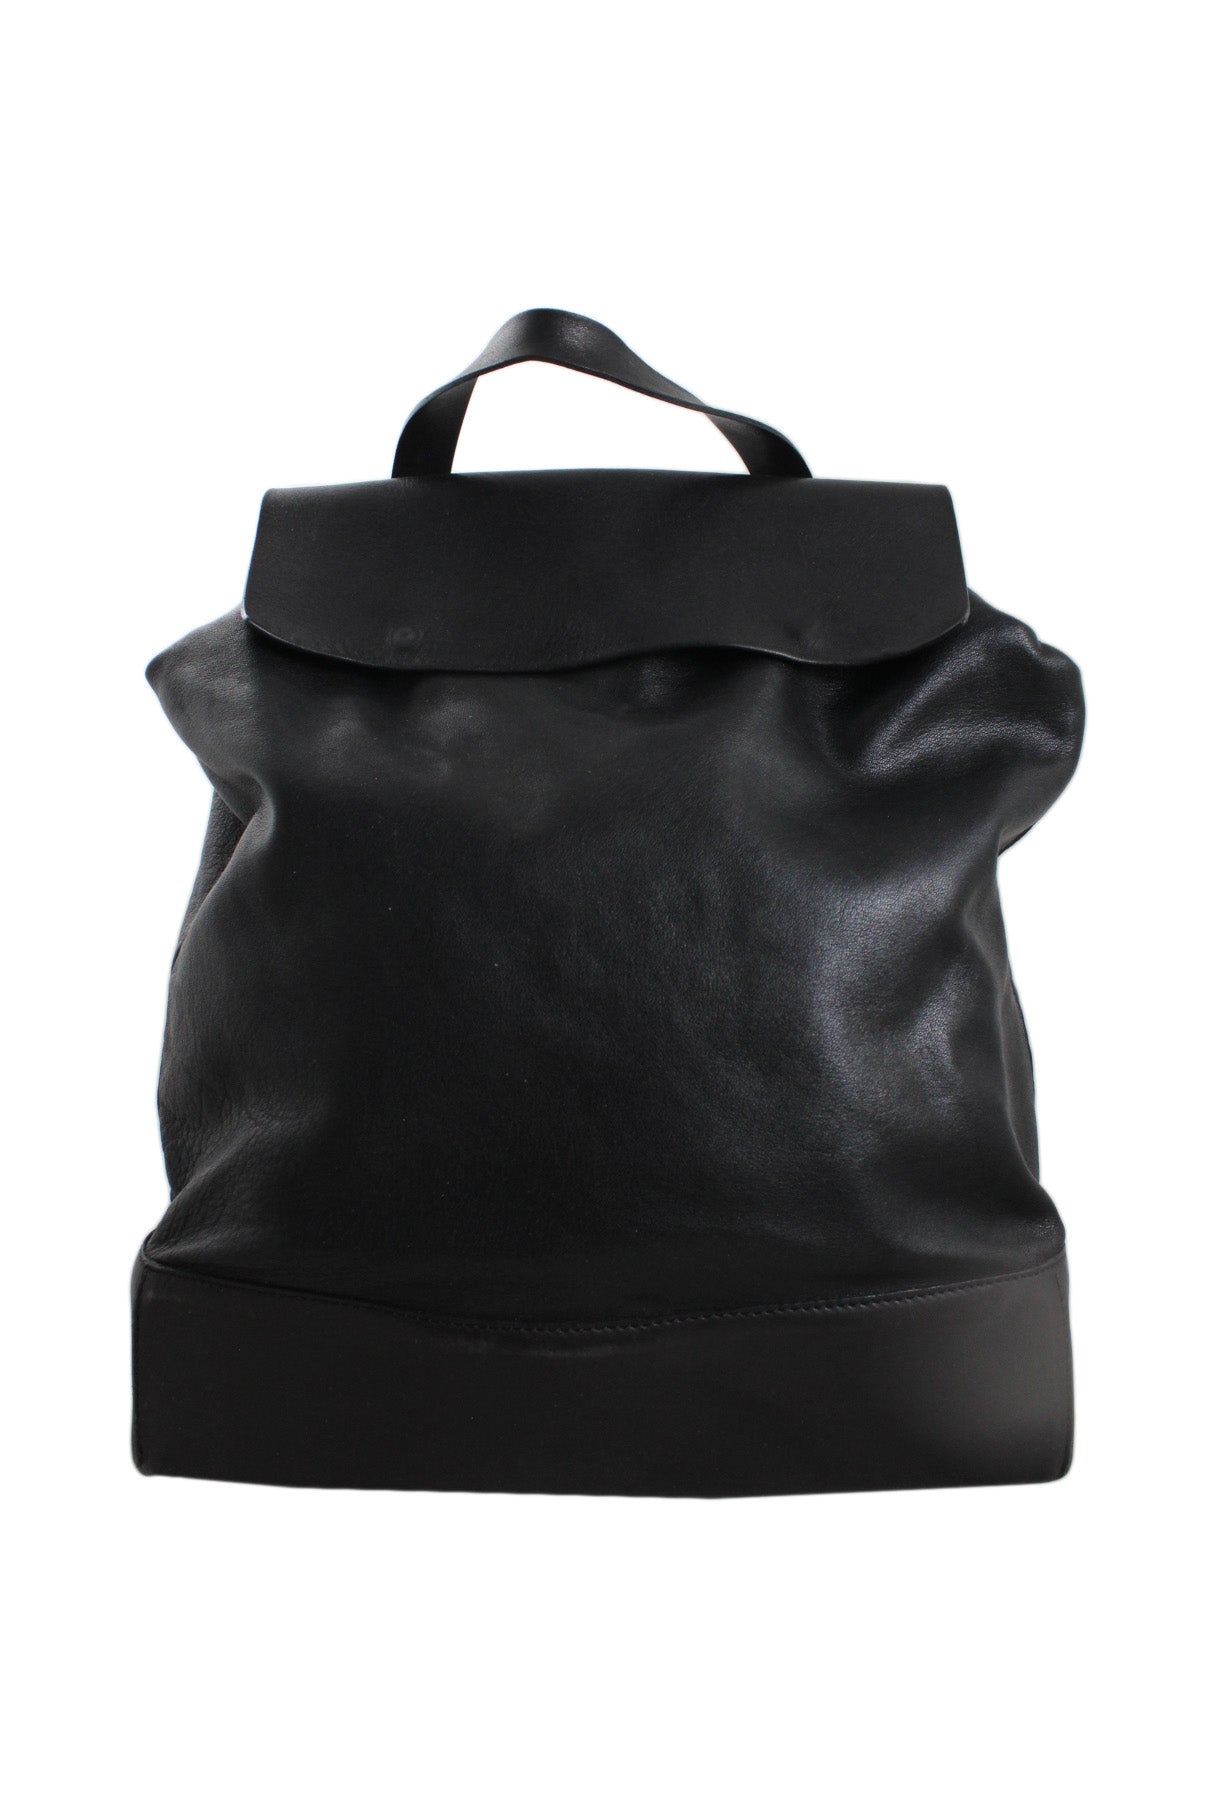 cos black leather backpack. features flap top, zip pocket at interior, fully lined, and snap button closure.